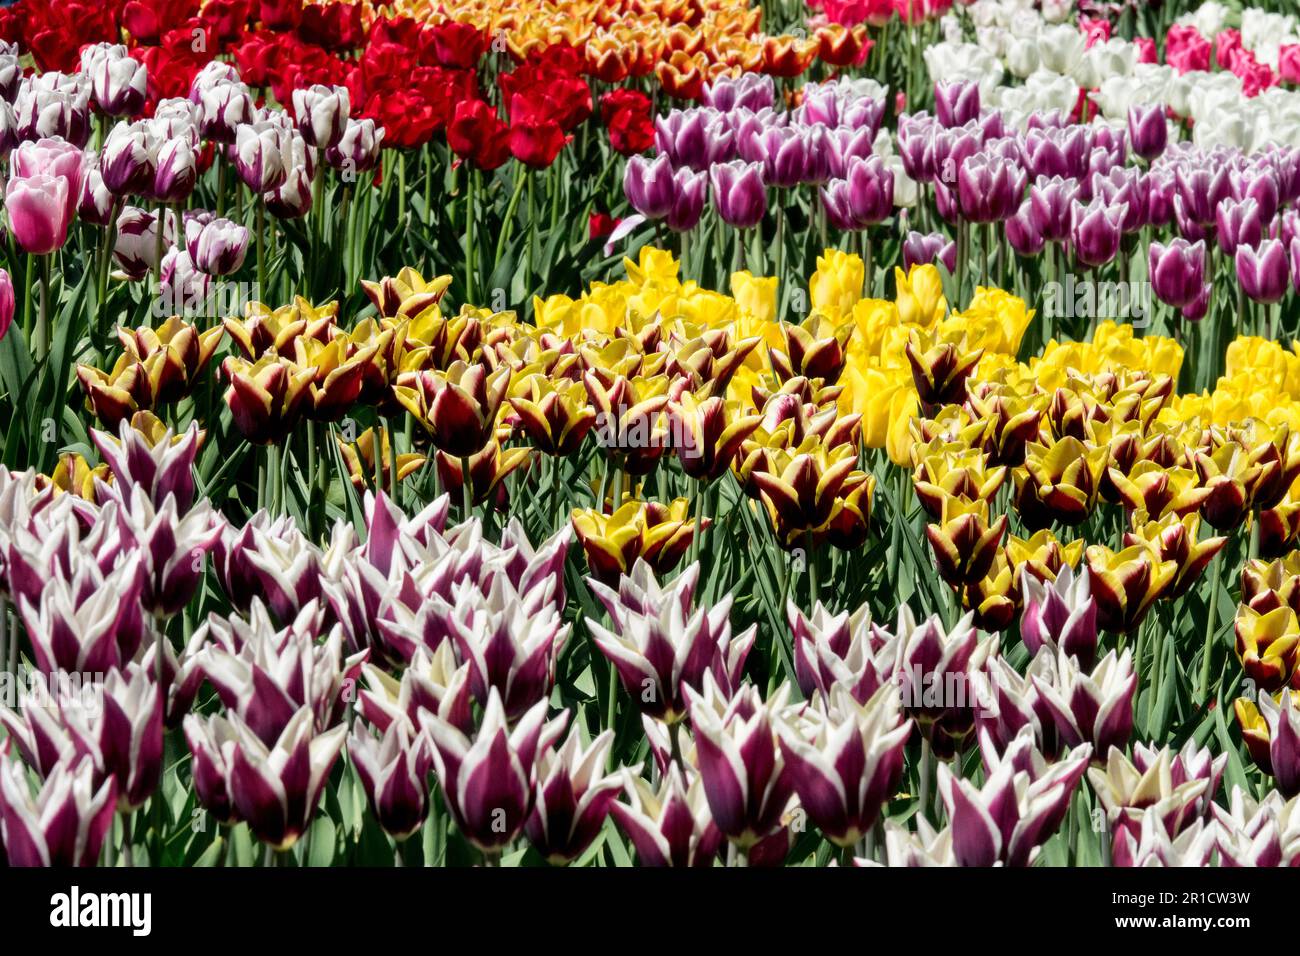 Colorate Tulips Garden White Yellow Purple Pink Red Mixed display cultivar Flower Bed Spring Flowers Triumph Tulips Flowering in Colorful Foto Stock